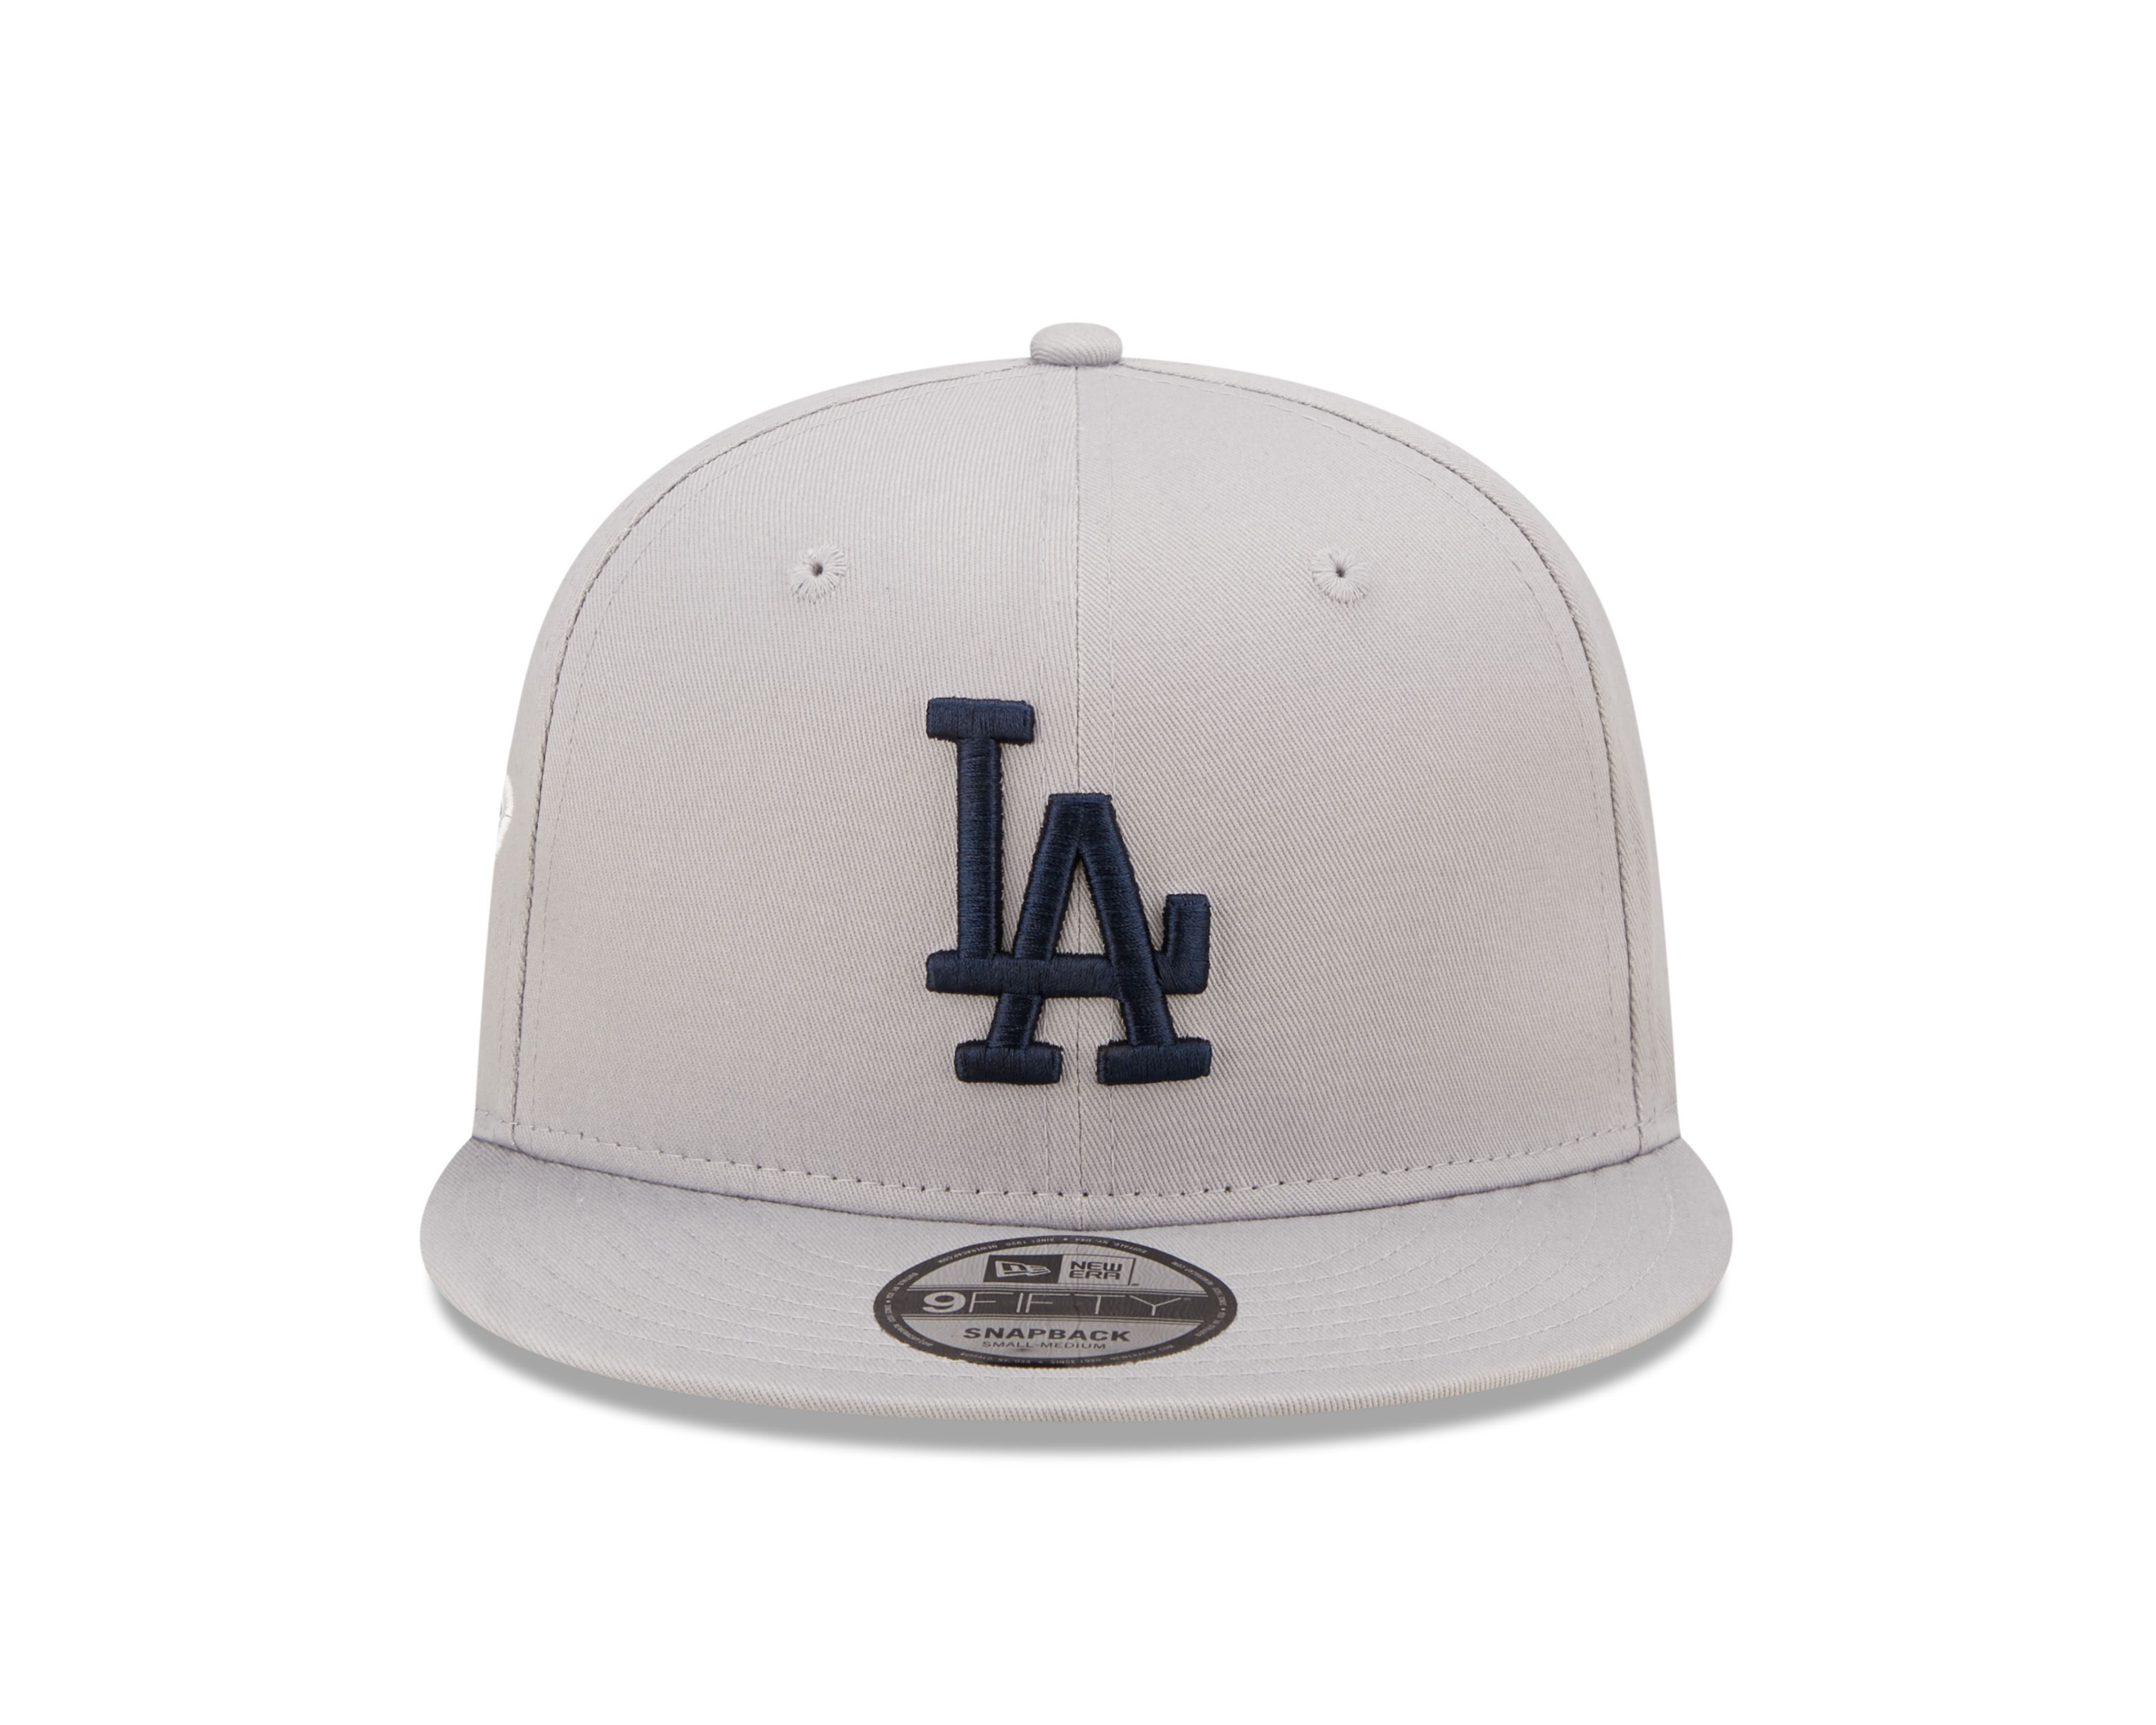 Los Angeles Dodgers MLB 40th Anniversary Sidepatch 9Fifty Snapback Cap Gray New Era